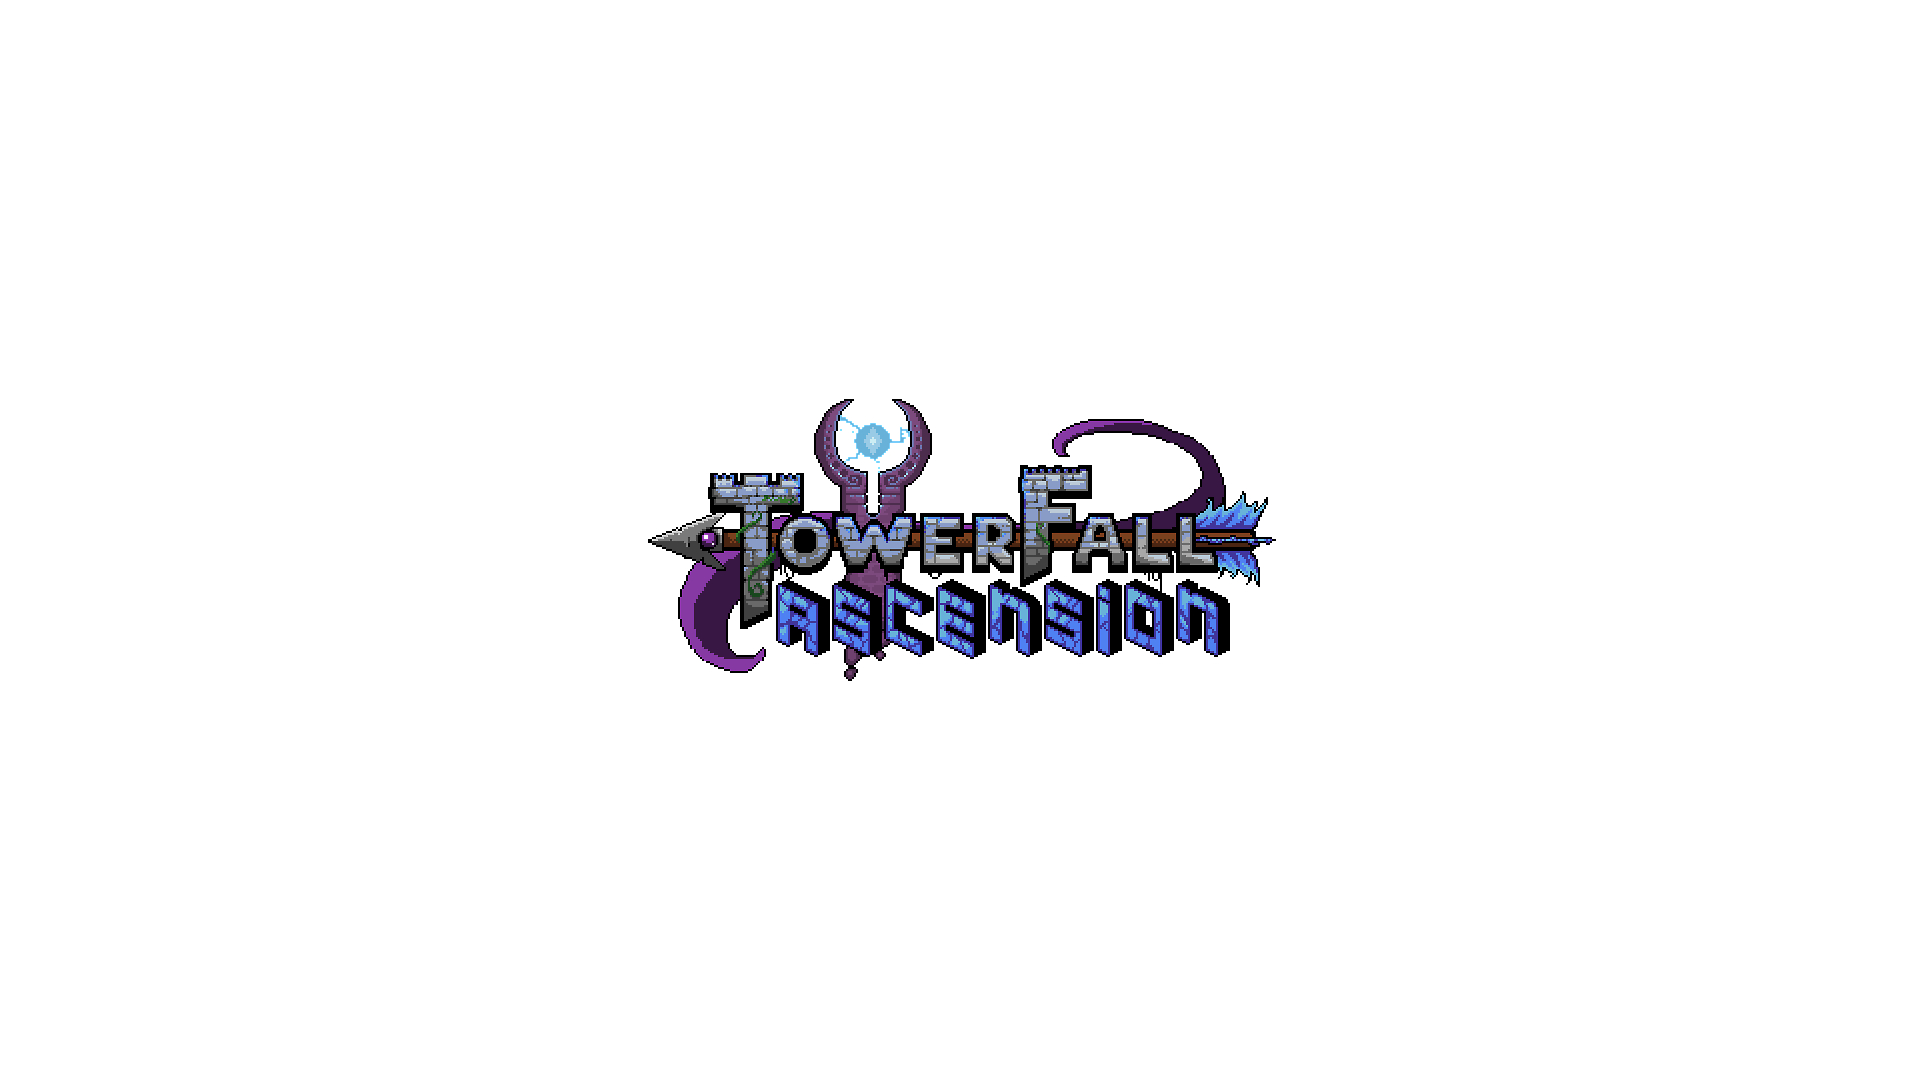 Video Game TowerFall Ascension HD Wallpaper | Background Image